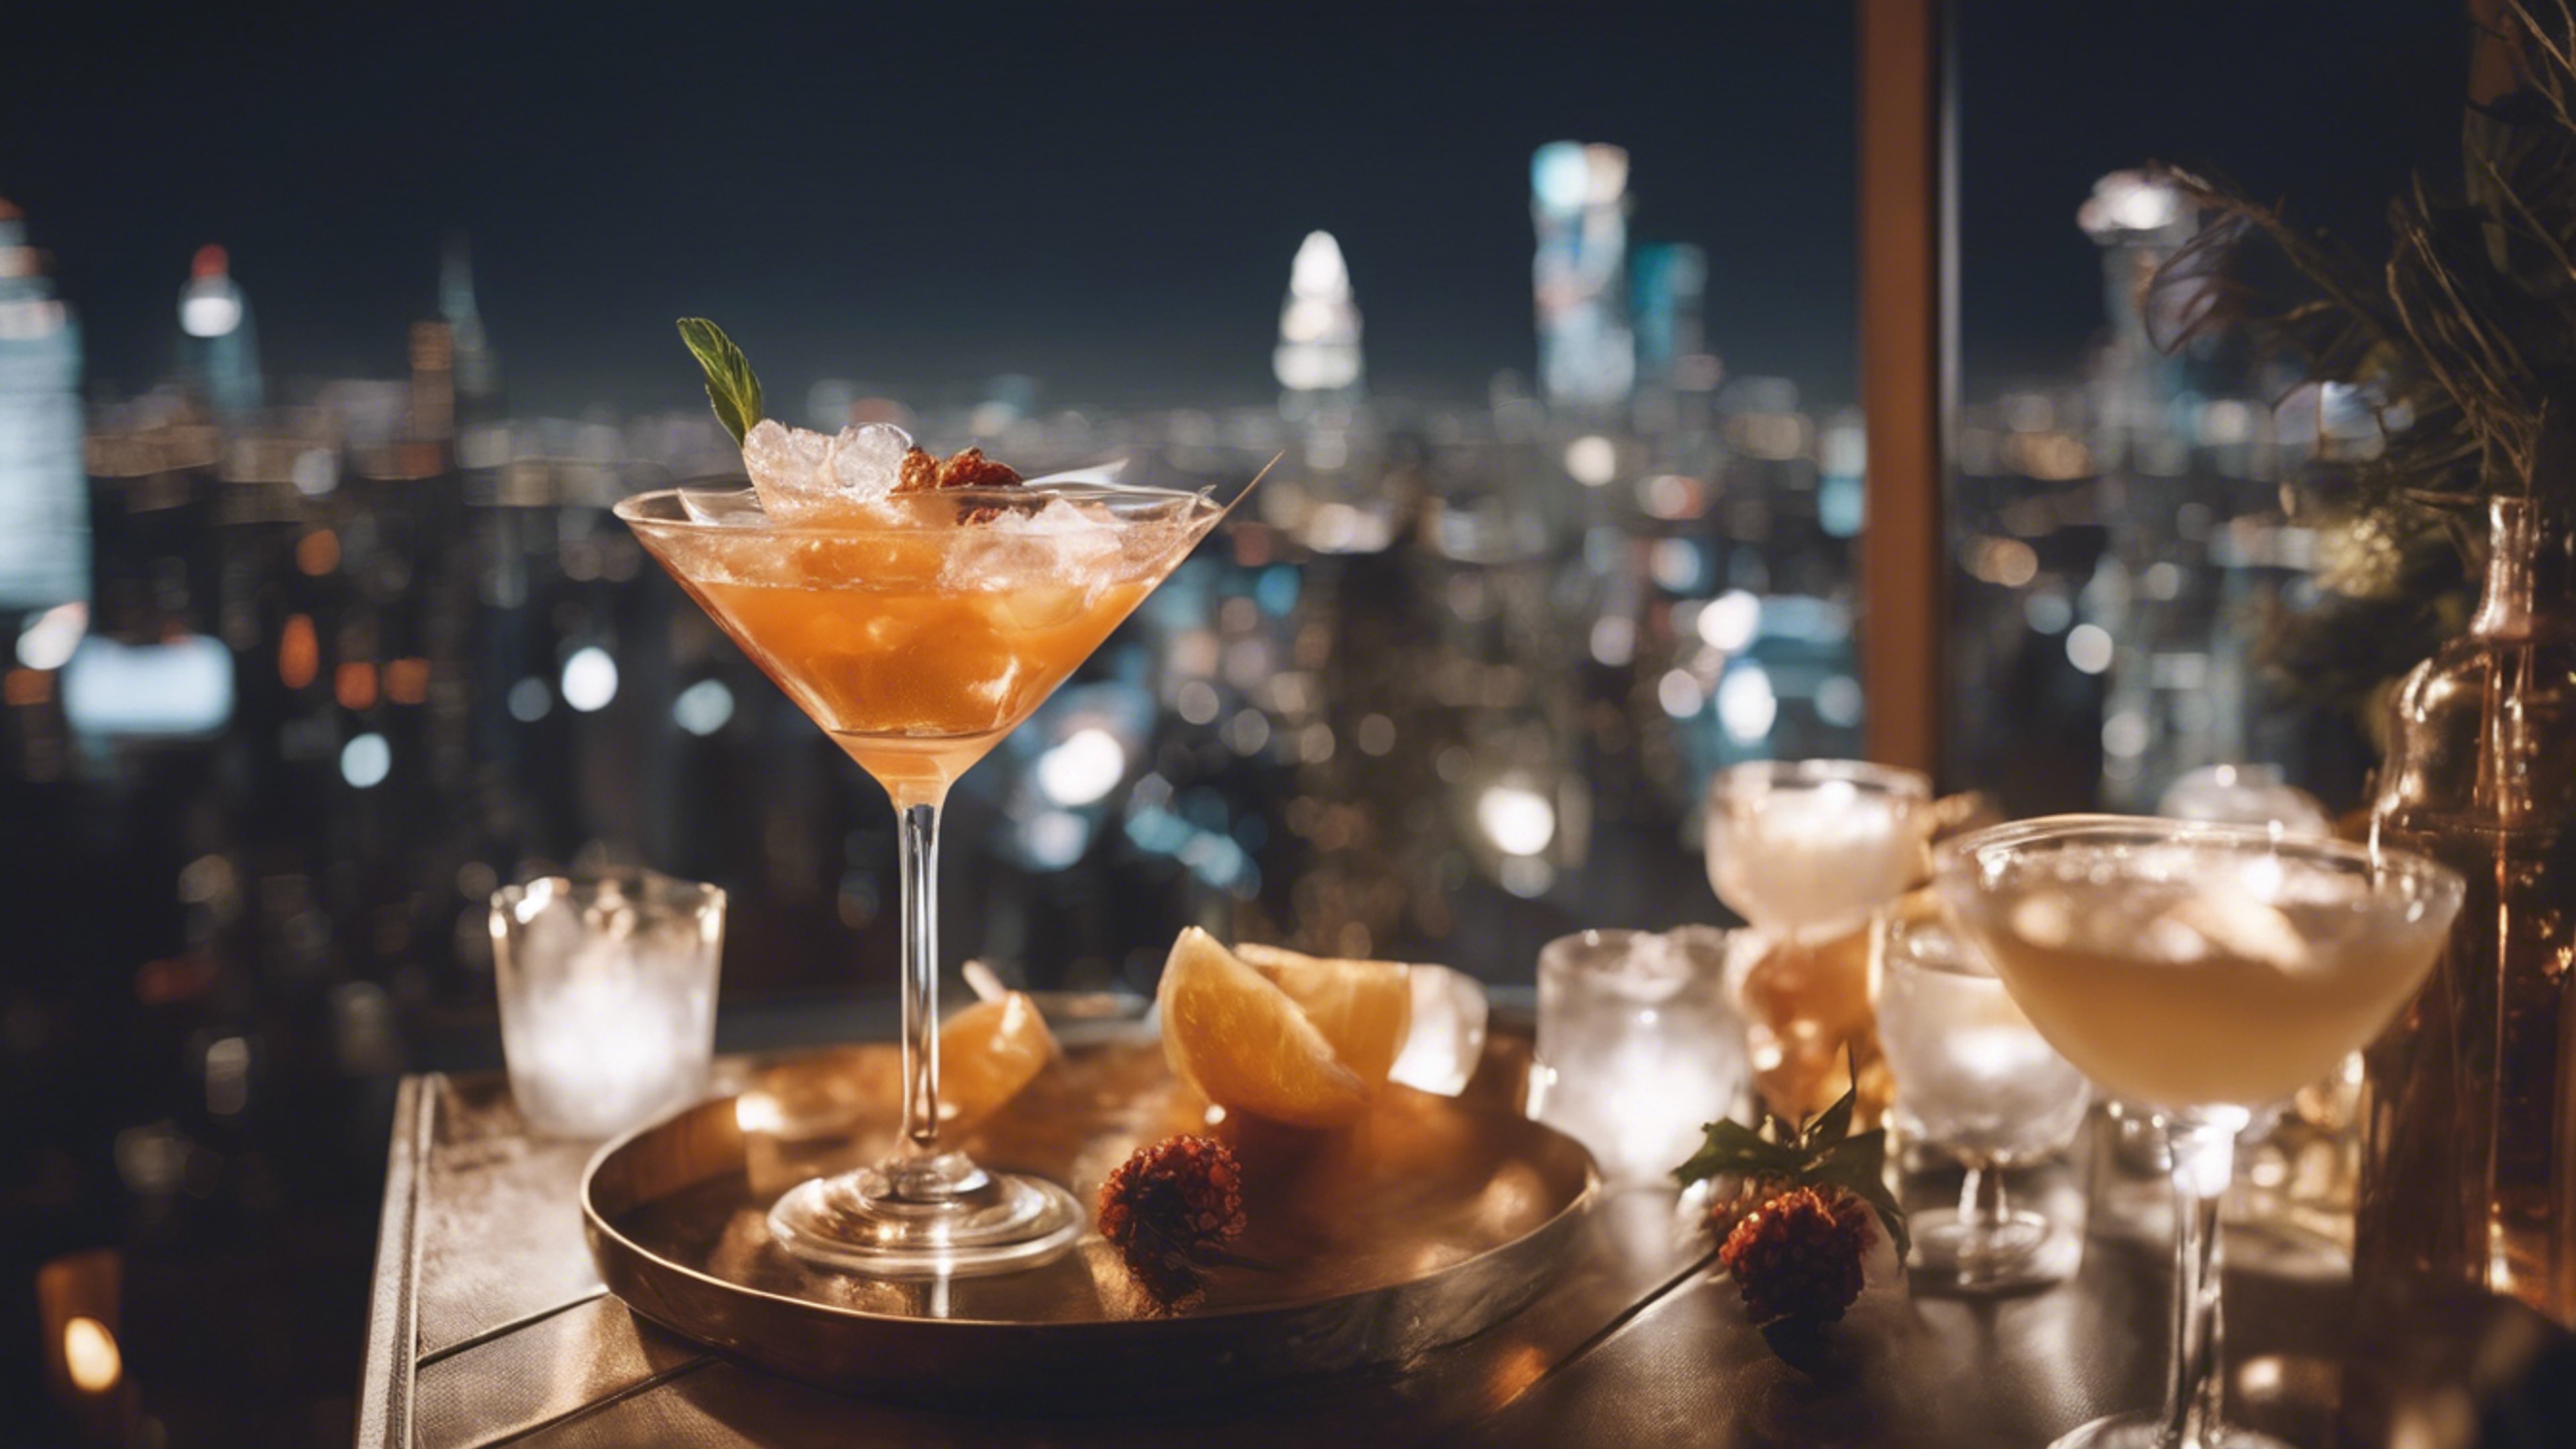 A chic cocktail party on a skyscraper's rooftop, twinkling city lights in the background. Wallpaper[1f77fbc1d16d40a8adab]